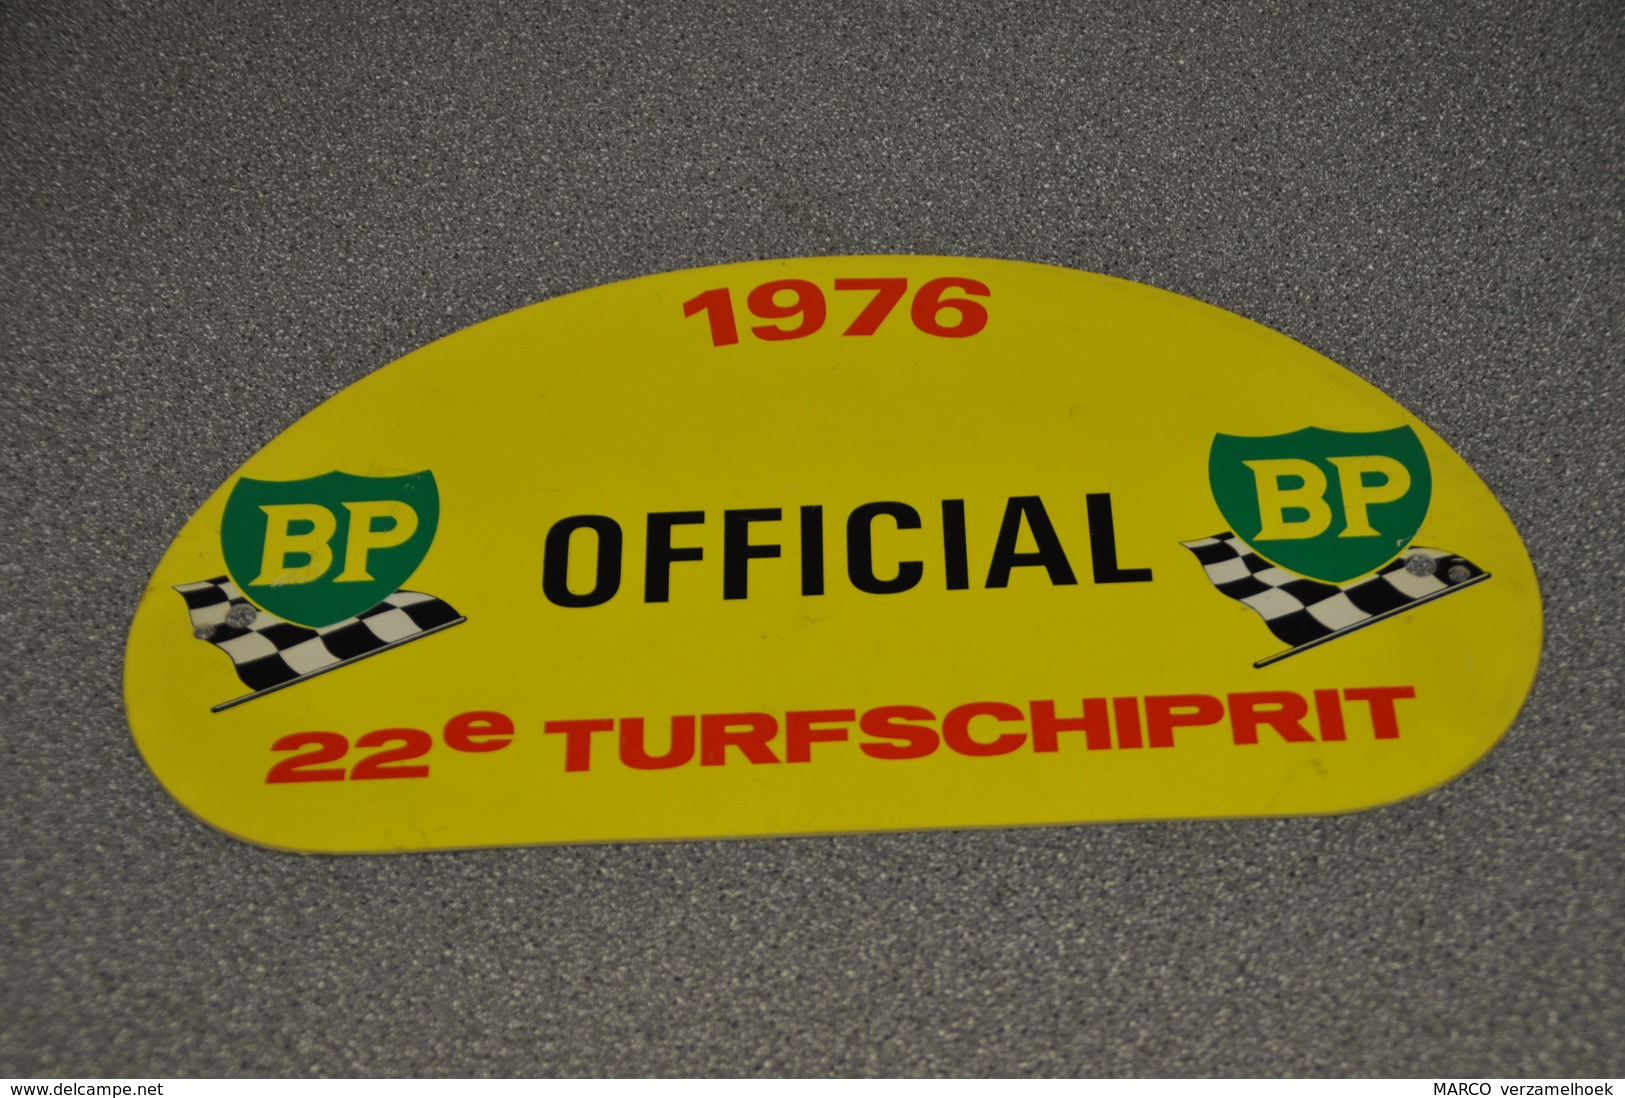 Rally Plaat-rallye Plaque Plastic: 22e Turfschiprit Breda 1976 OFFICIAL BP - Rally-affiches